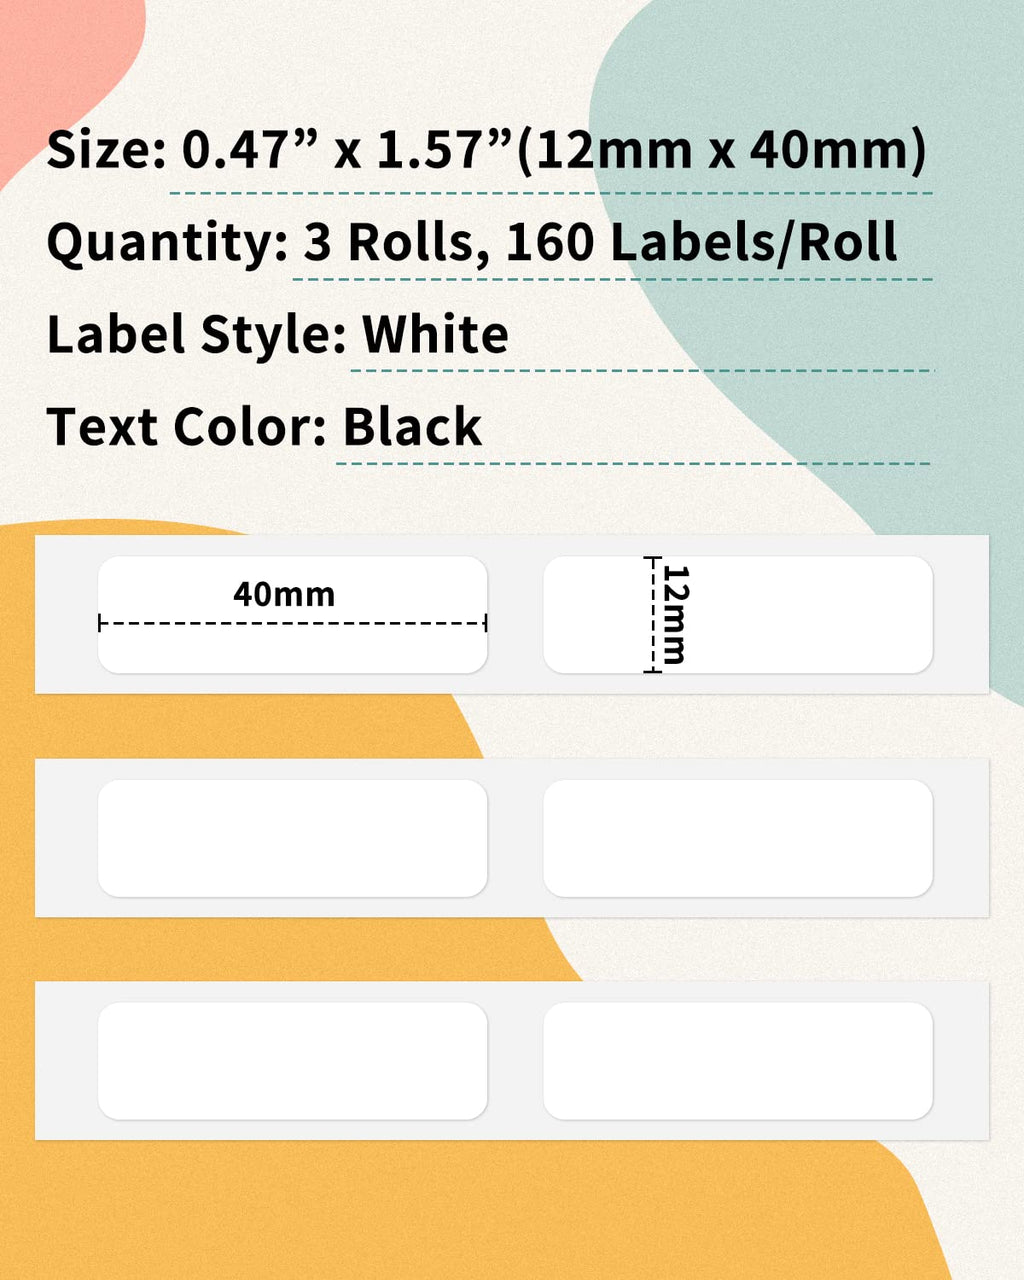  [AUSTRALIA] - Thermal Label Paper Adhesive Label for Q30S Label Makers, White, 3/8" X 1 1/2" (12mm X 40mm), Strong Adhesion, Waterproof, 3 Rolls 12mmx40mm